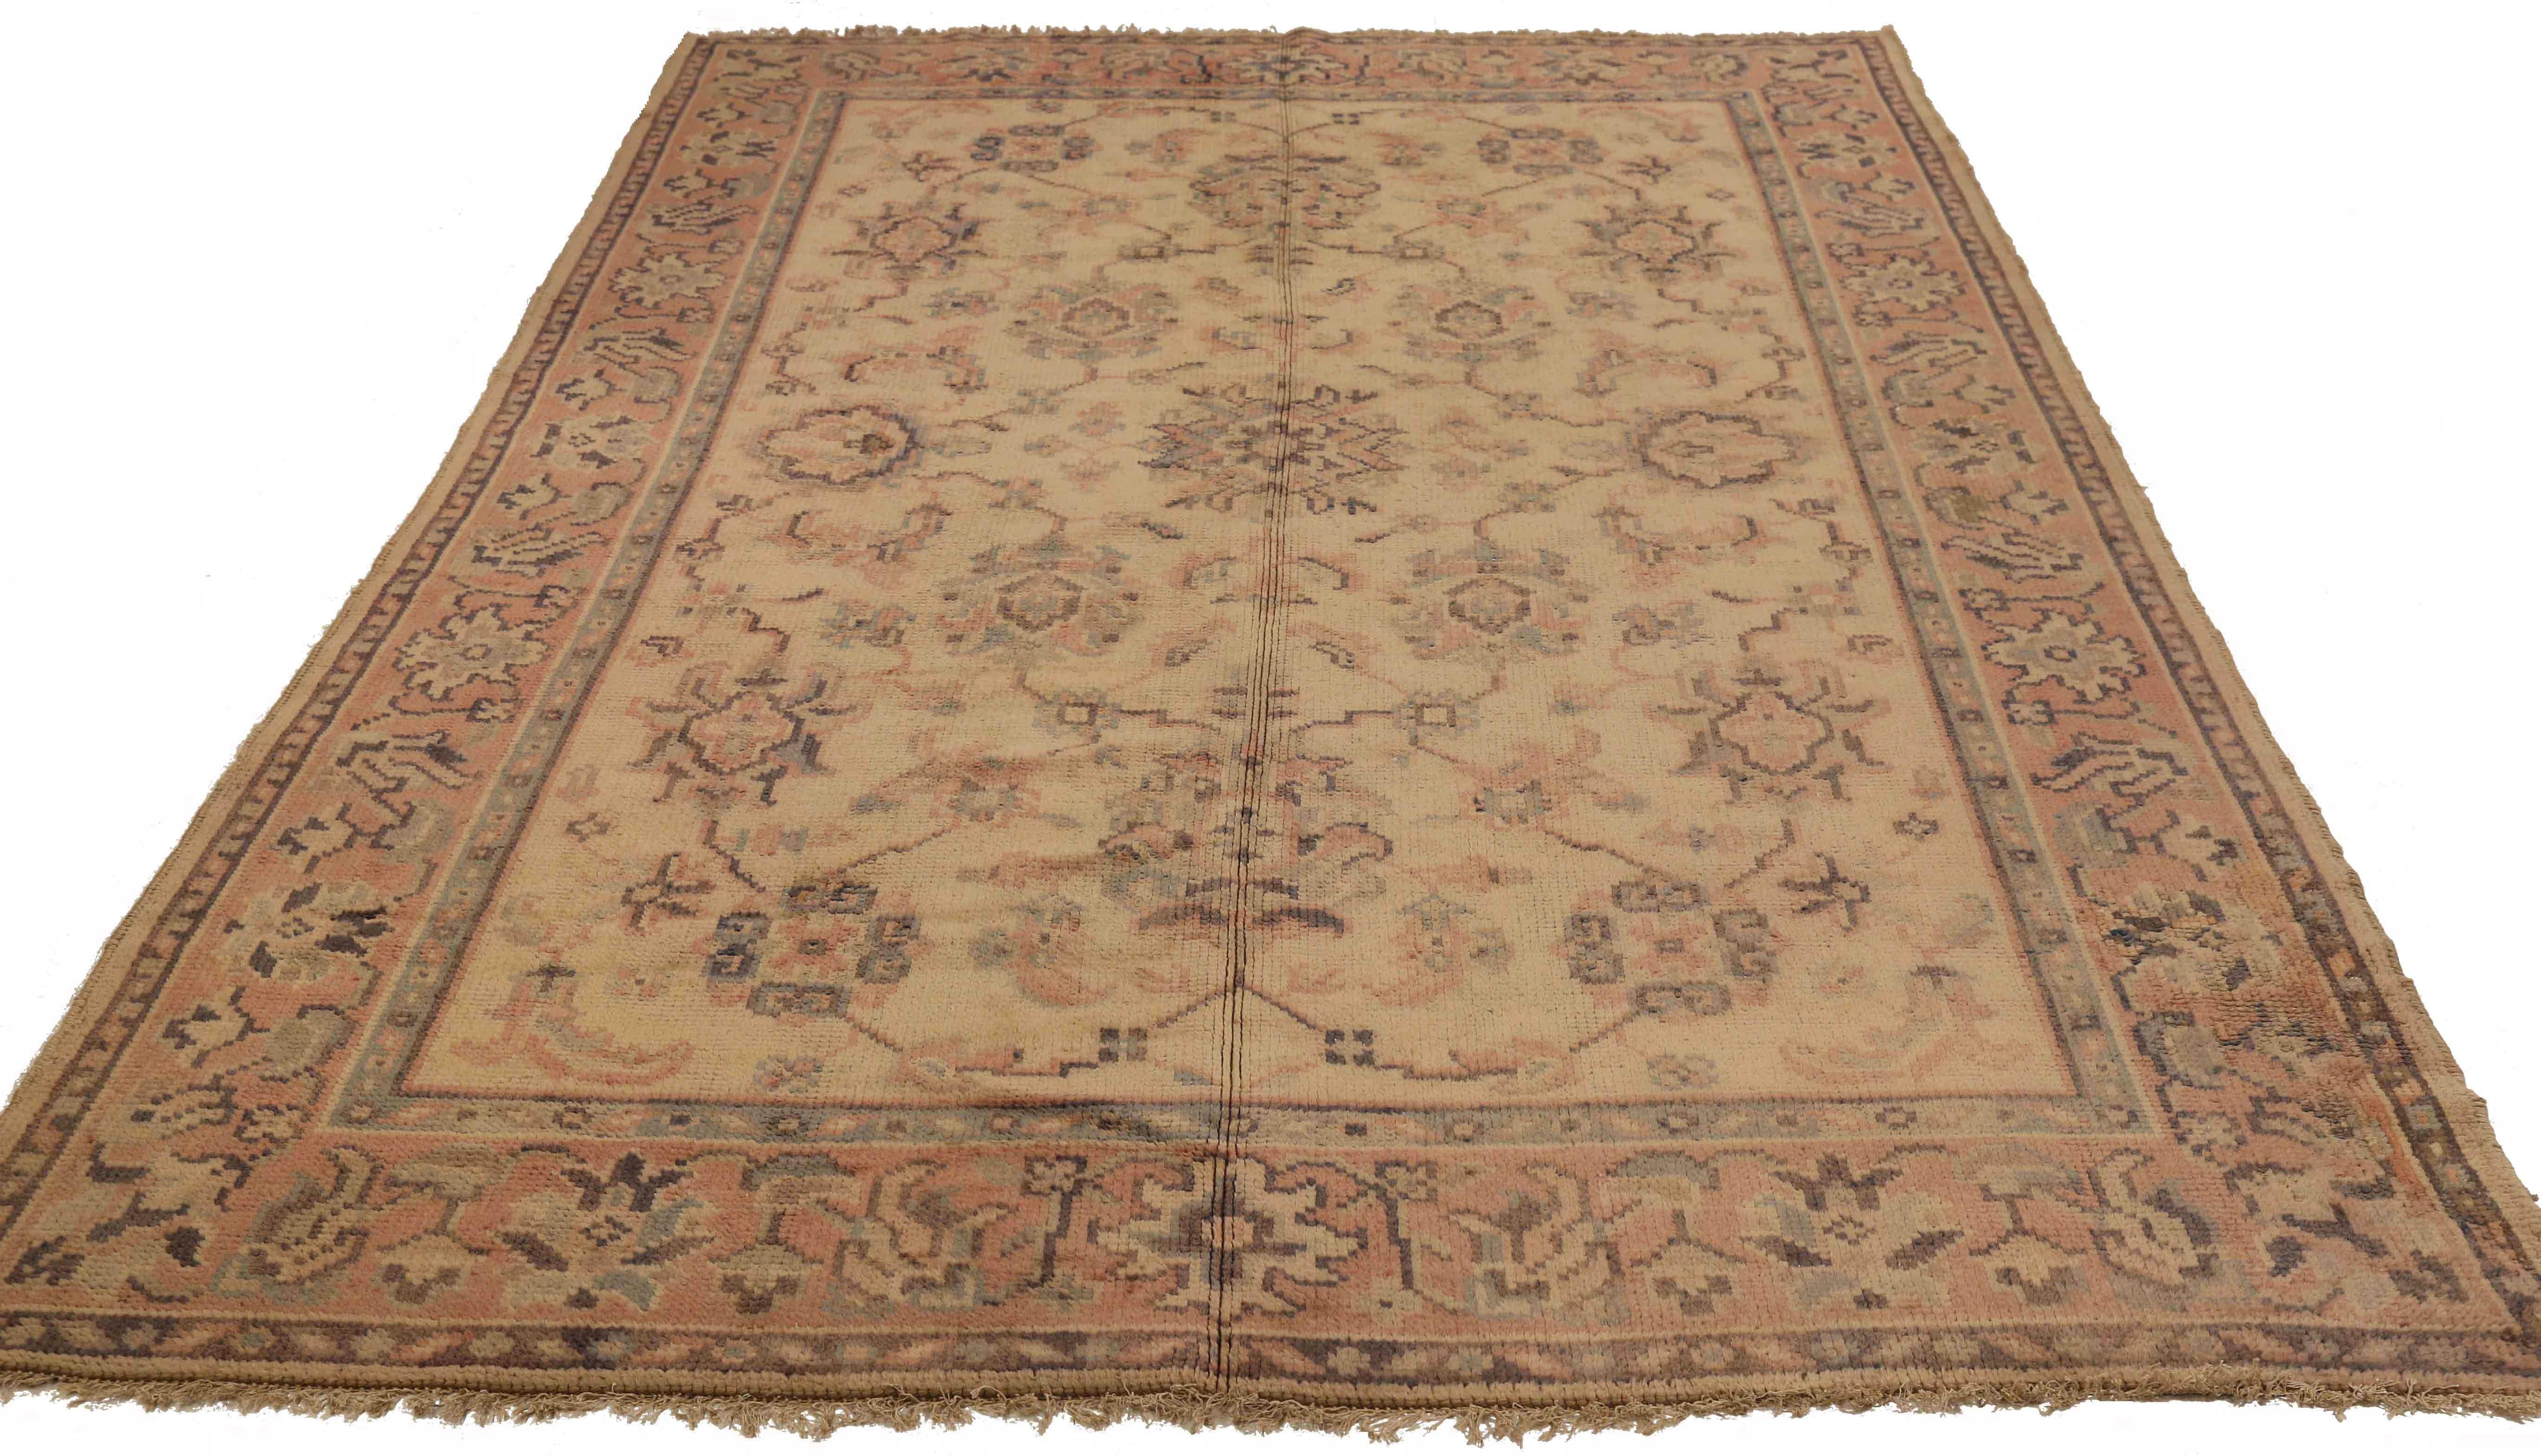 Antique Turkish area rug handwoven from the finest sheep’s wool. It’s colored with all-natural vegetable dyes that are safe for humans and pets. It’s a traditional Oushak design handwoven by expert artisans. It’s a lovely area rug that can be